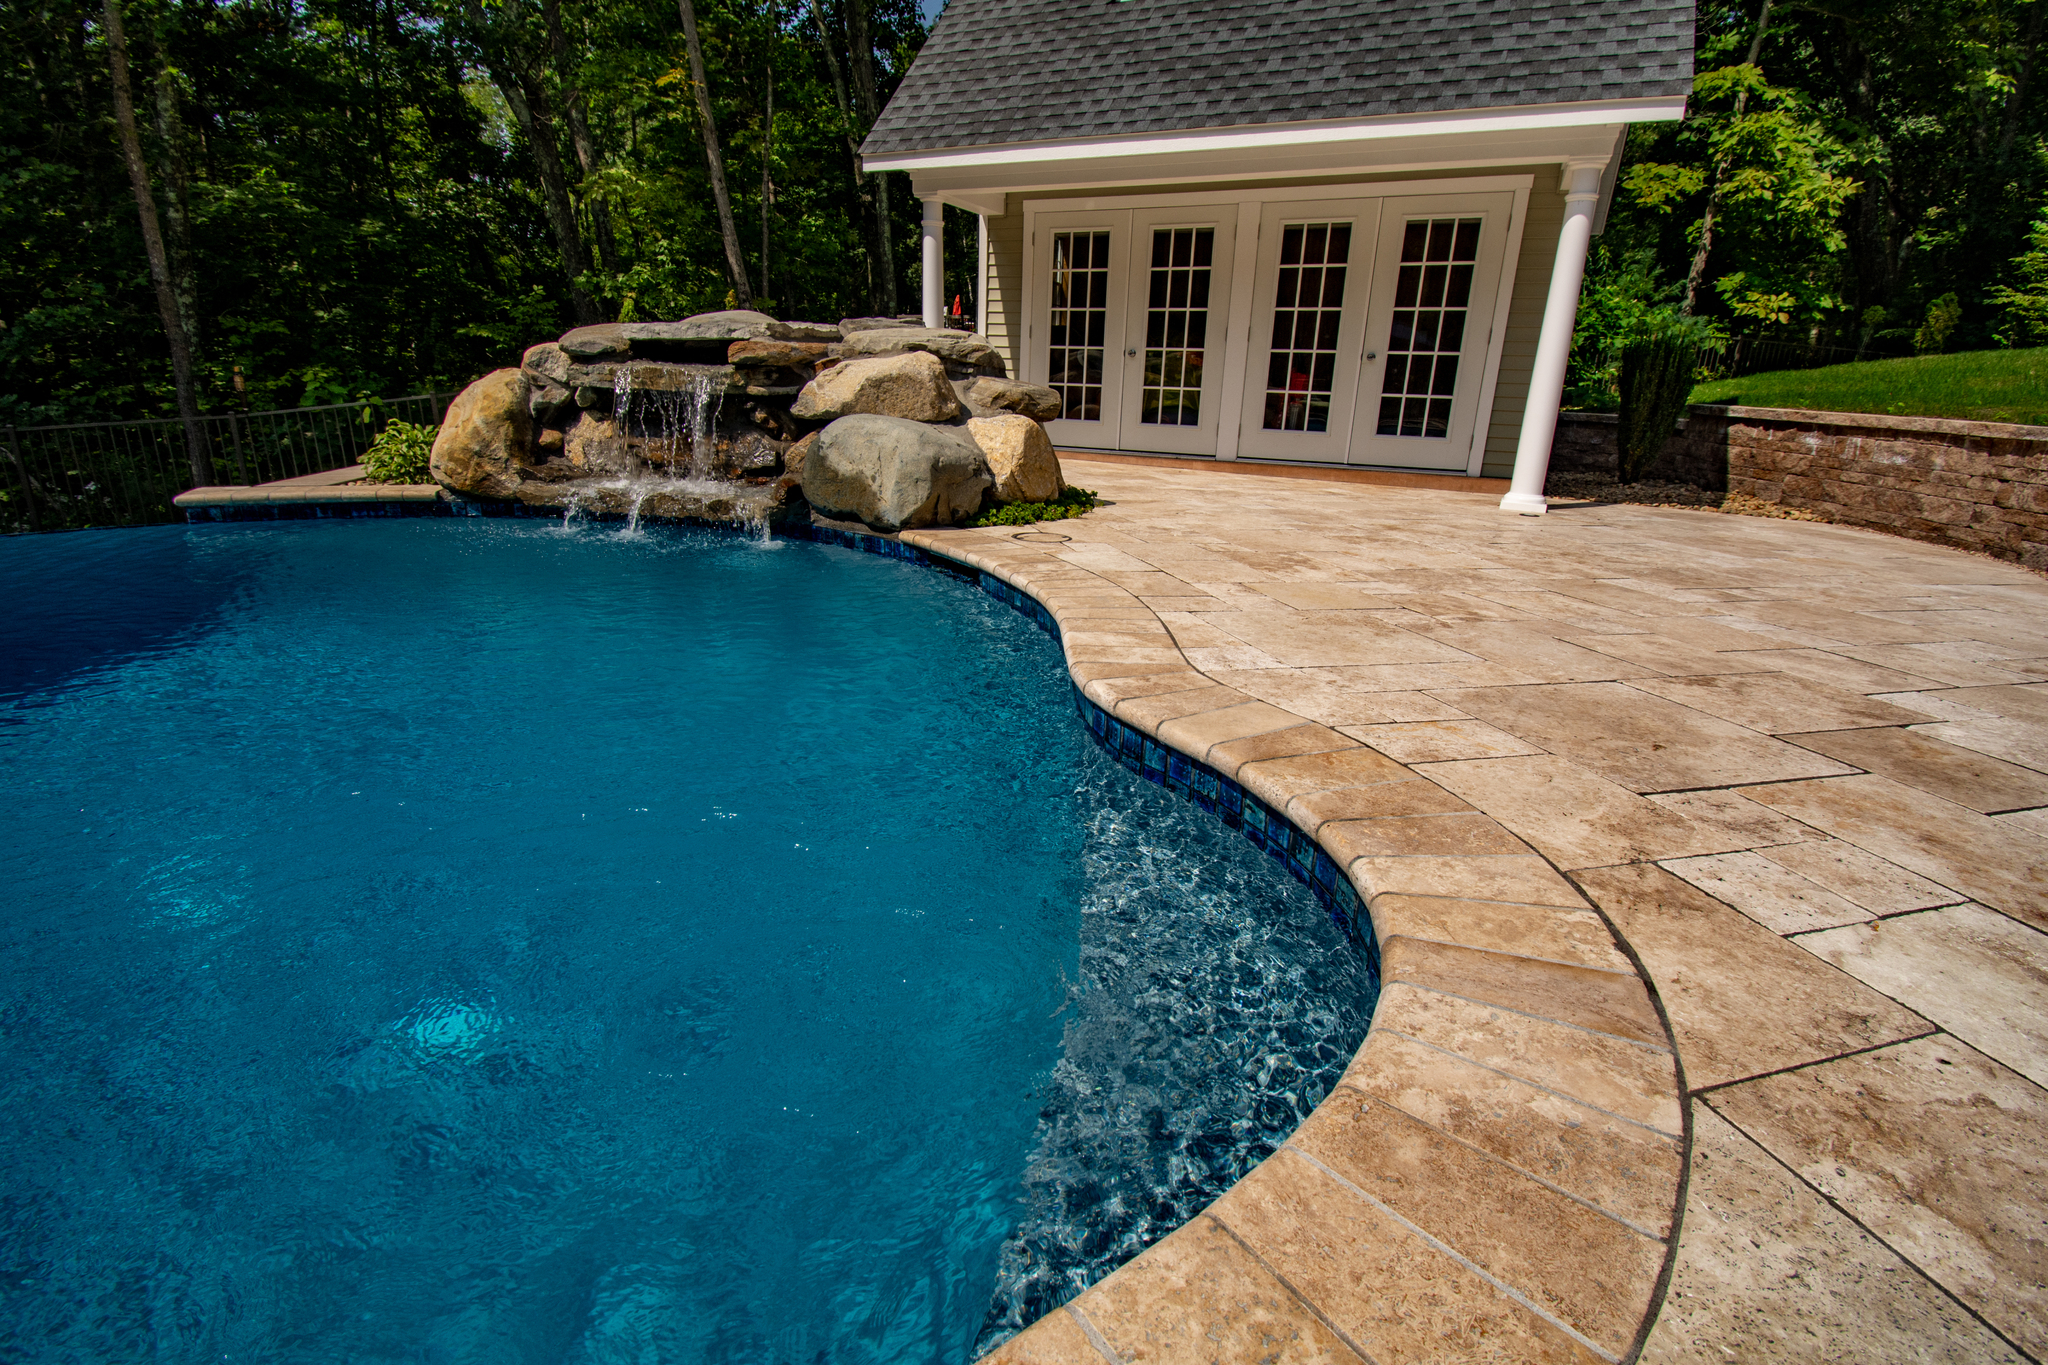 Pool Coping Tile, Are Tiled Pools Better